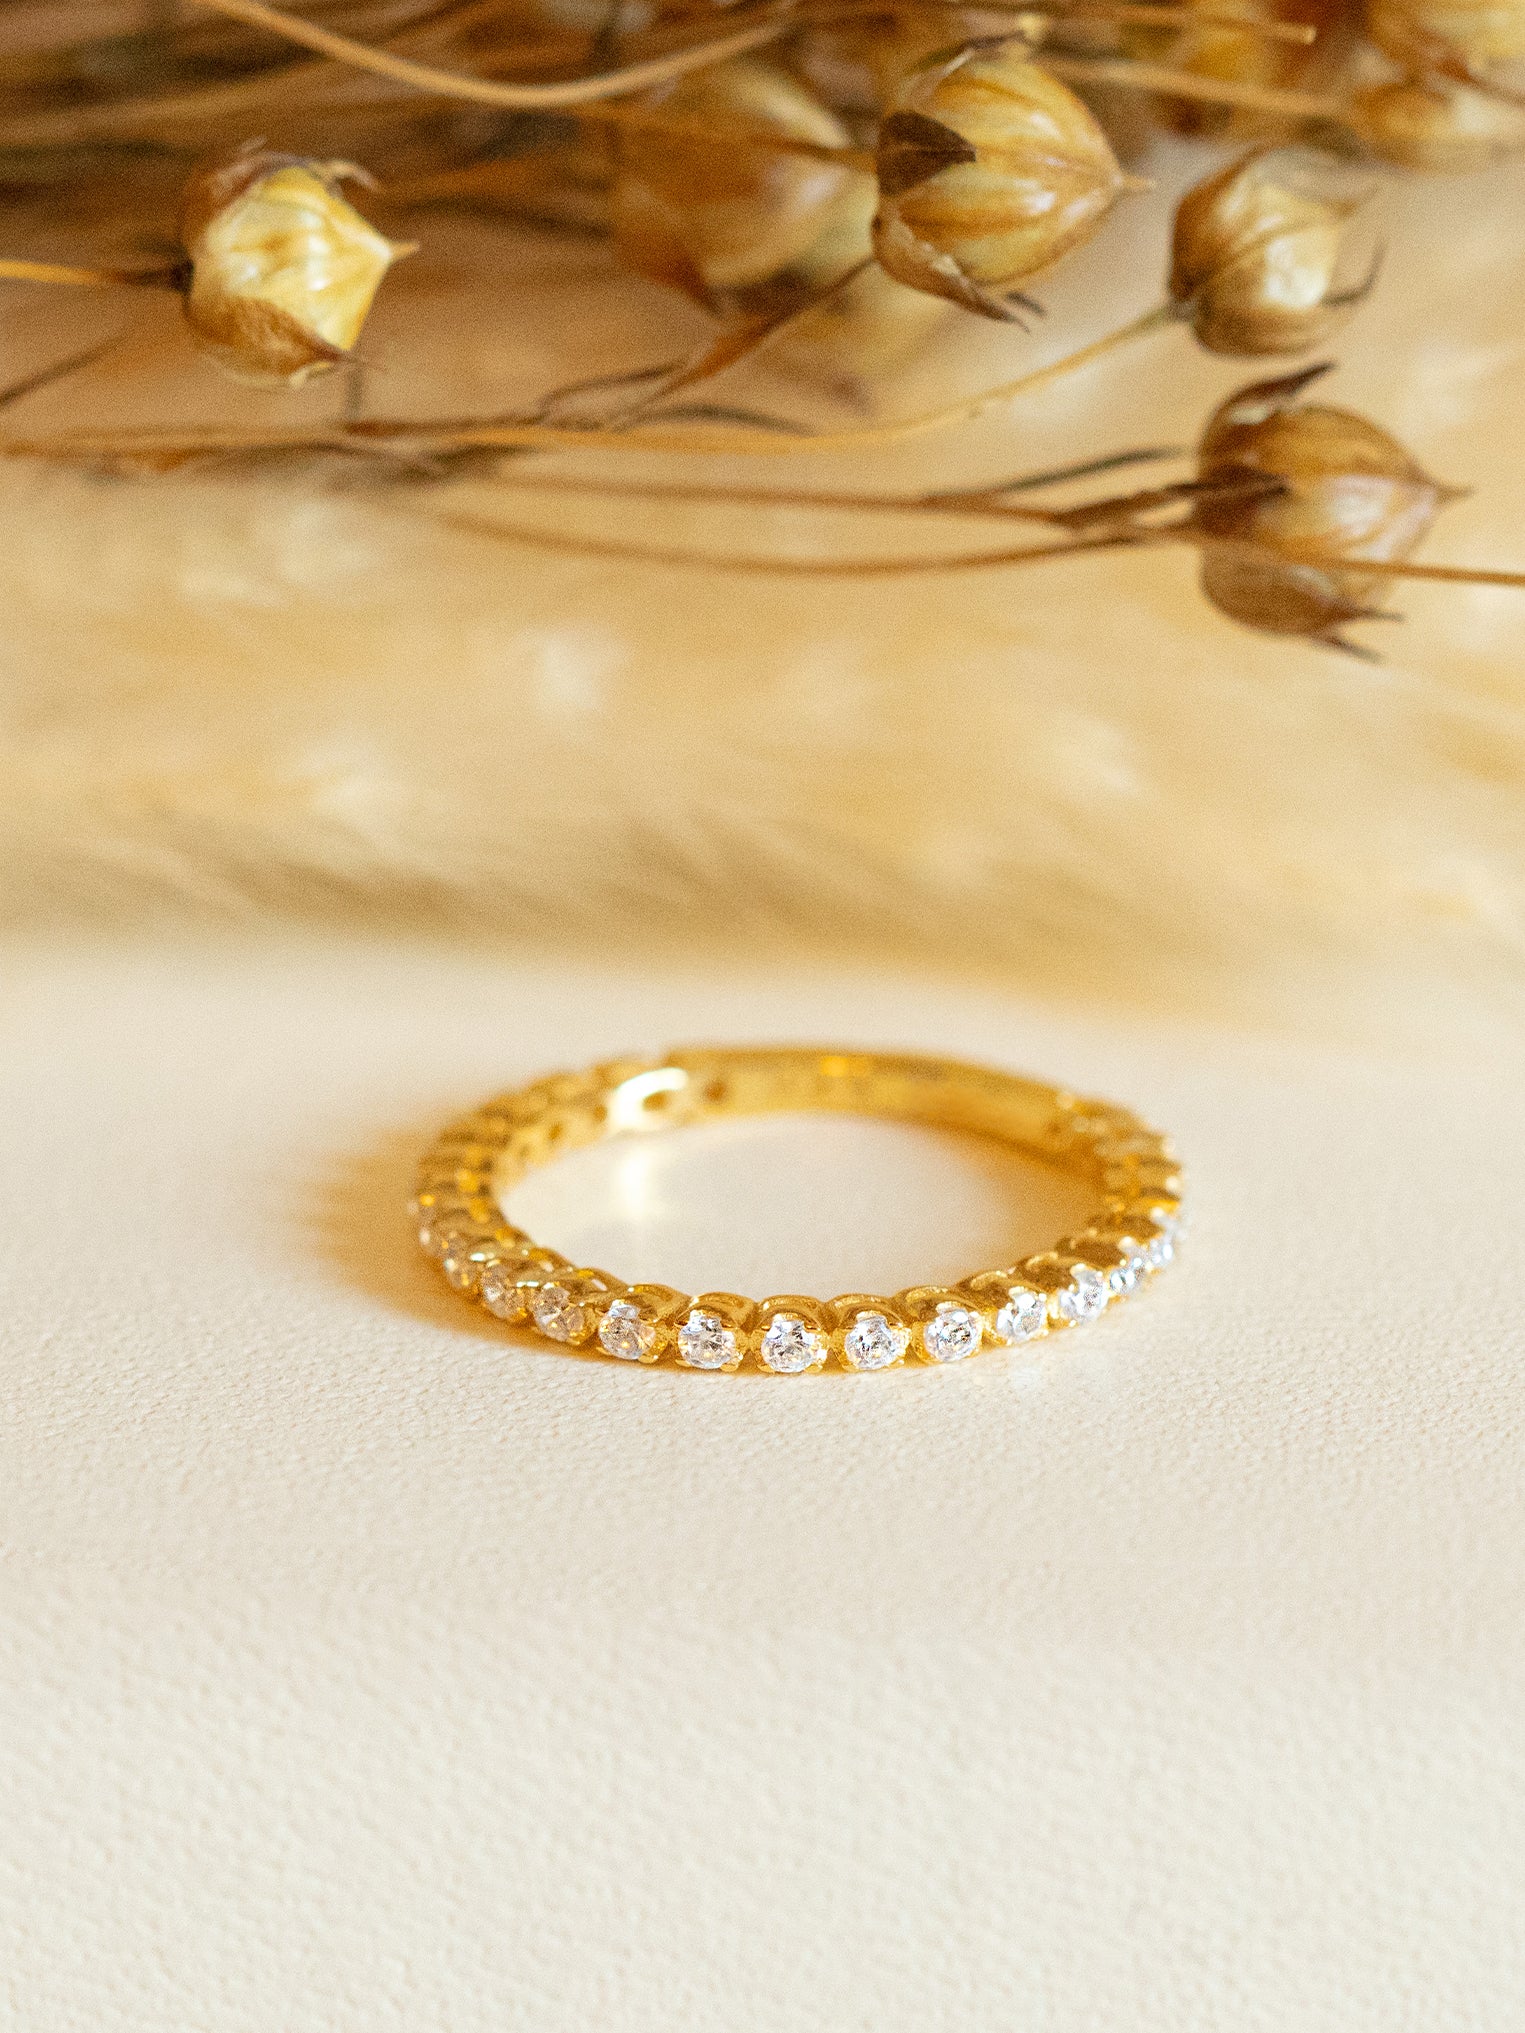 Gold Thin Ring For Stacking With Scalloped Round Stones